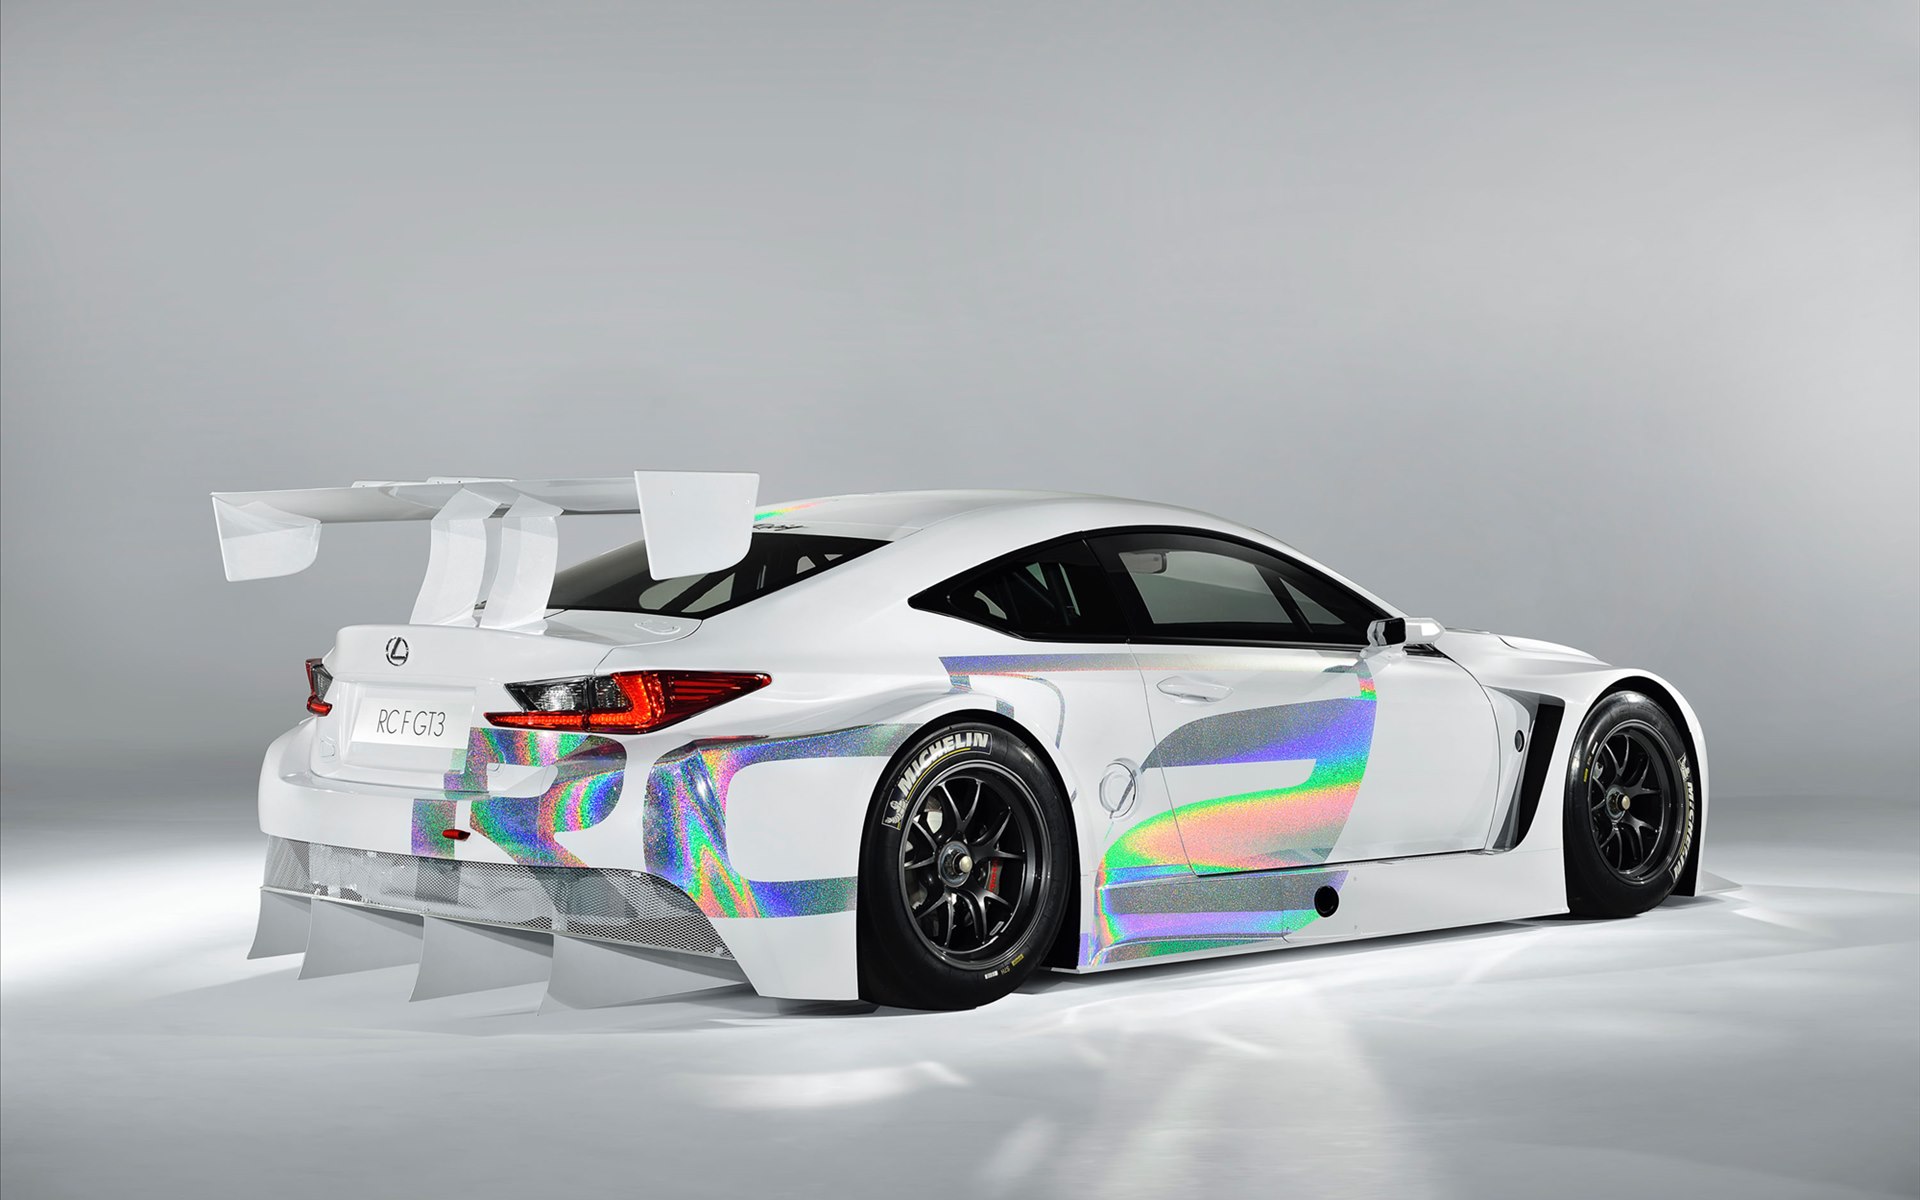 Lexus Rc F Gt3 Concept Get Car Wallpaper In High Quality